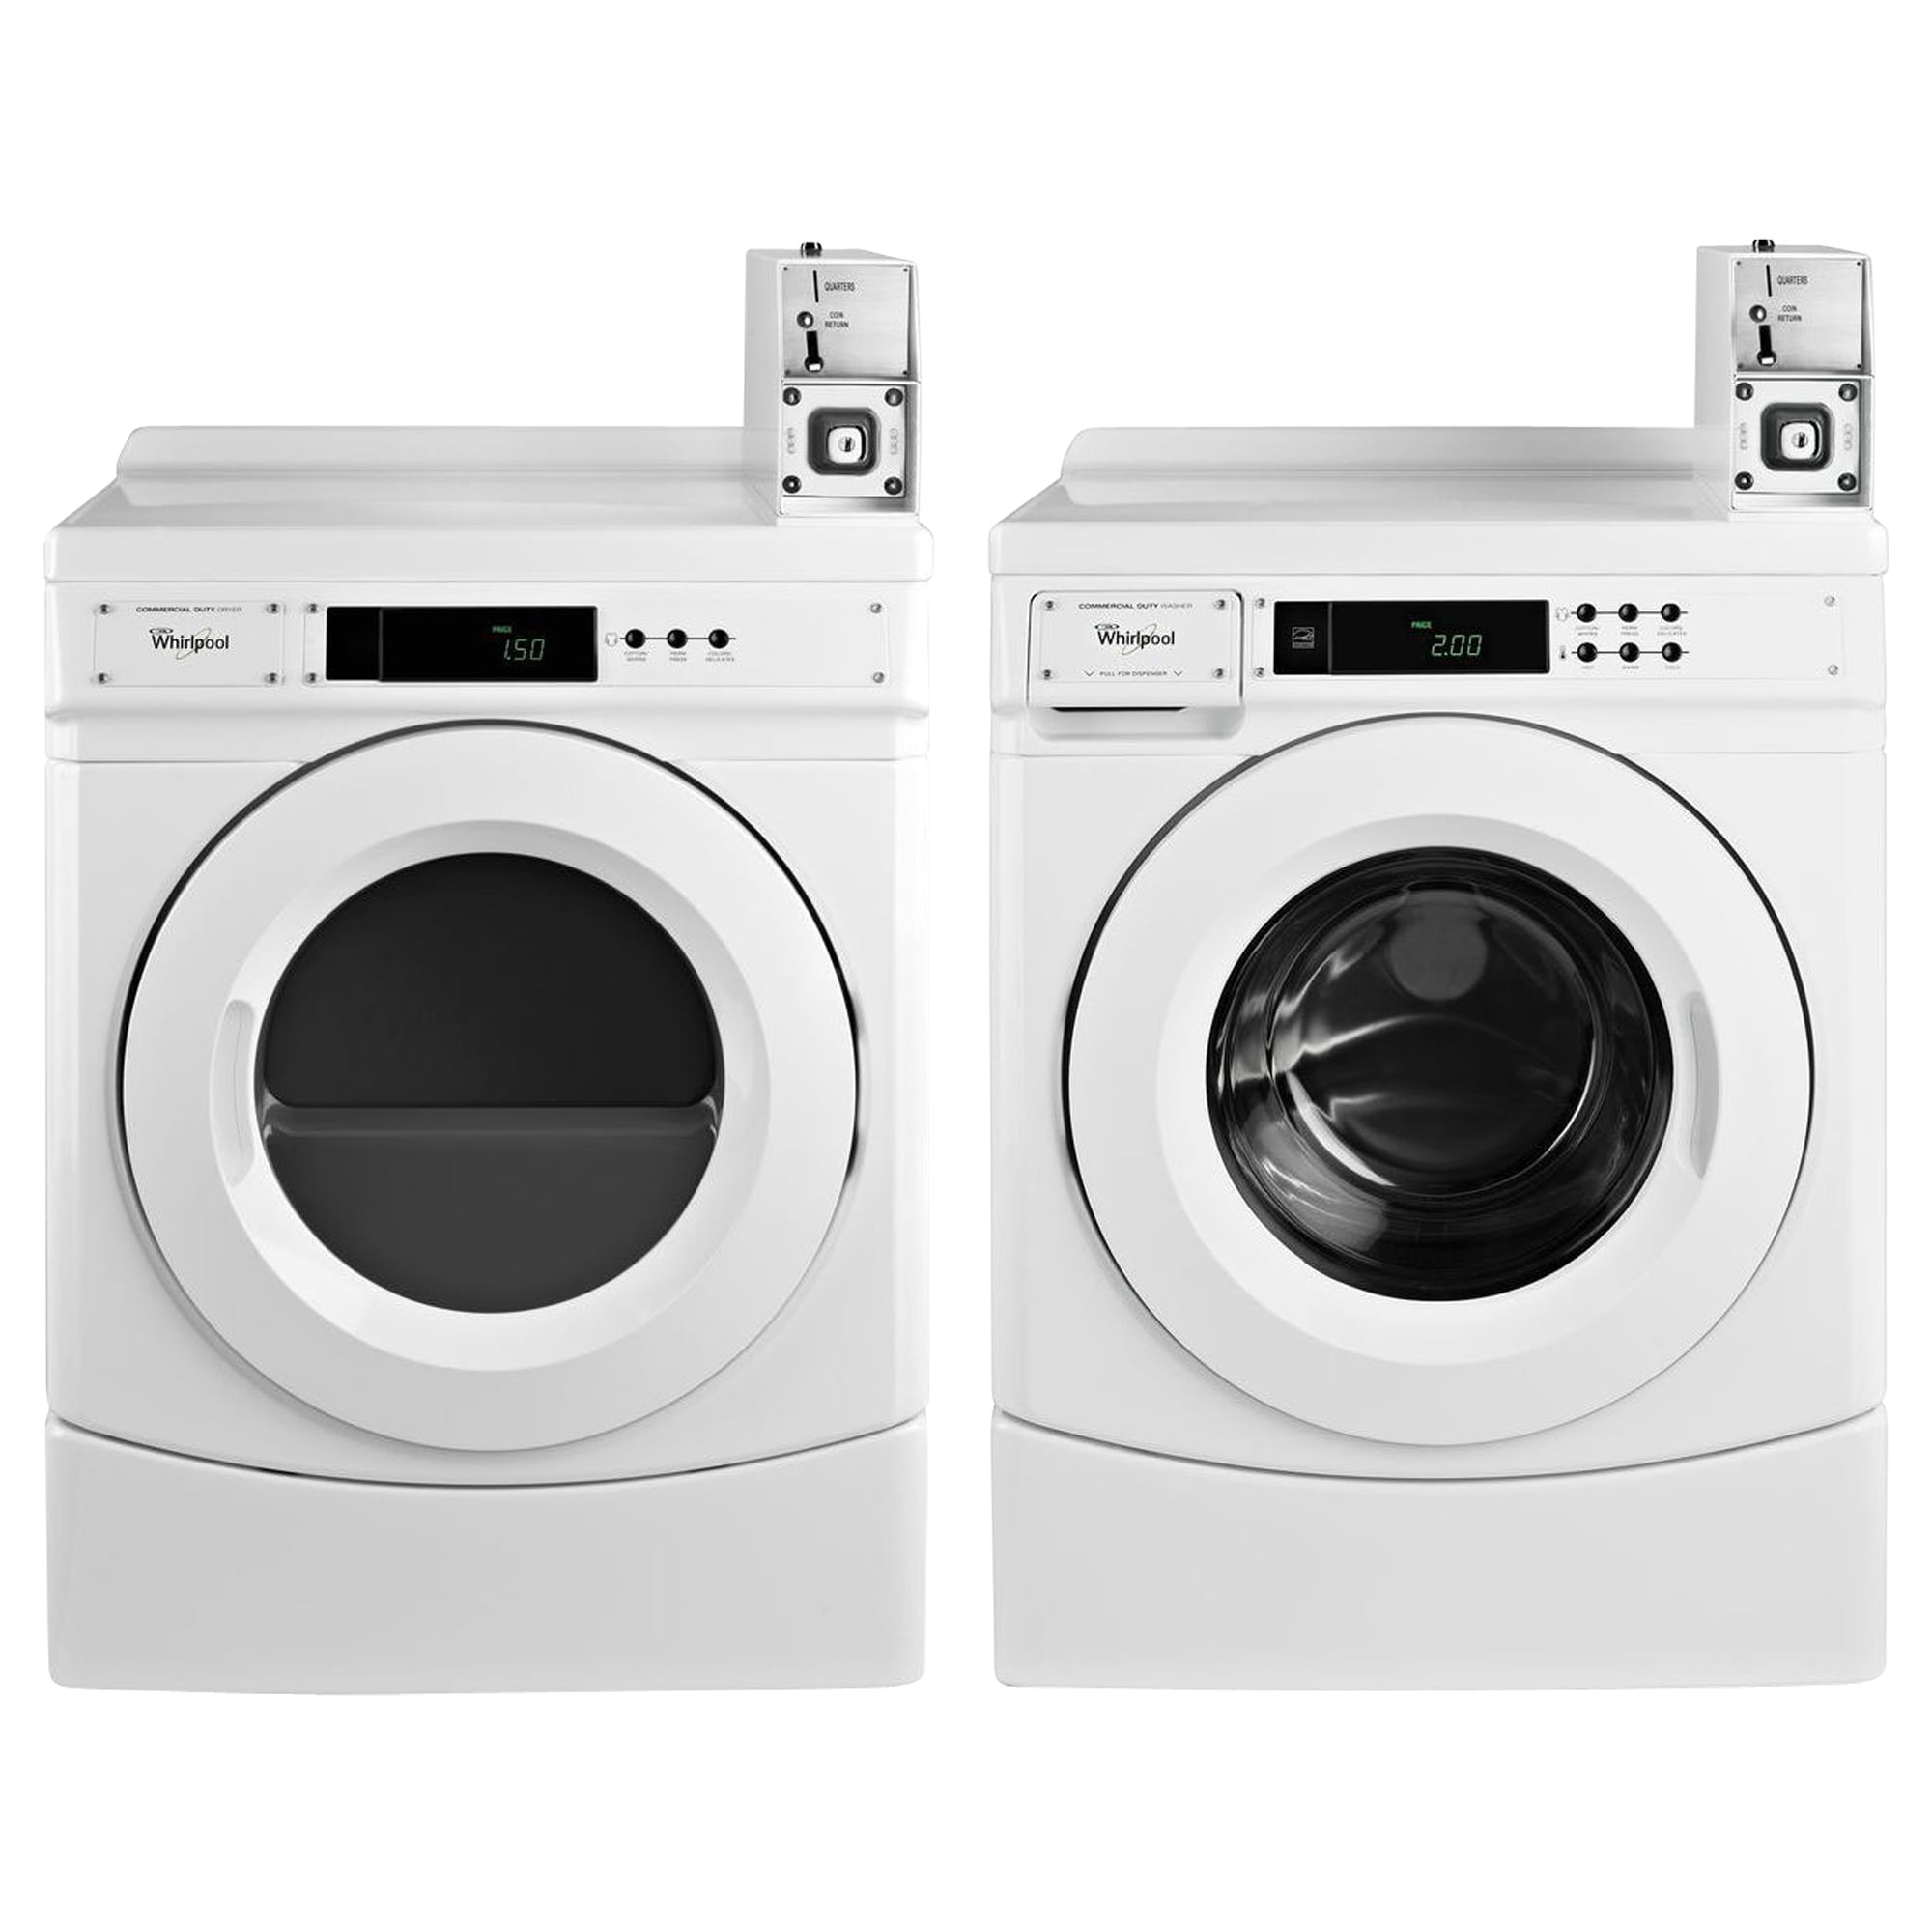 ada-compliant-washer-dryer-sets-at-lowes